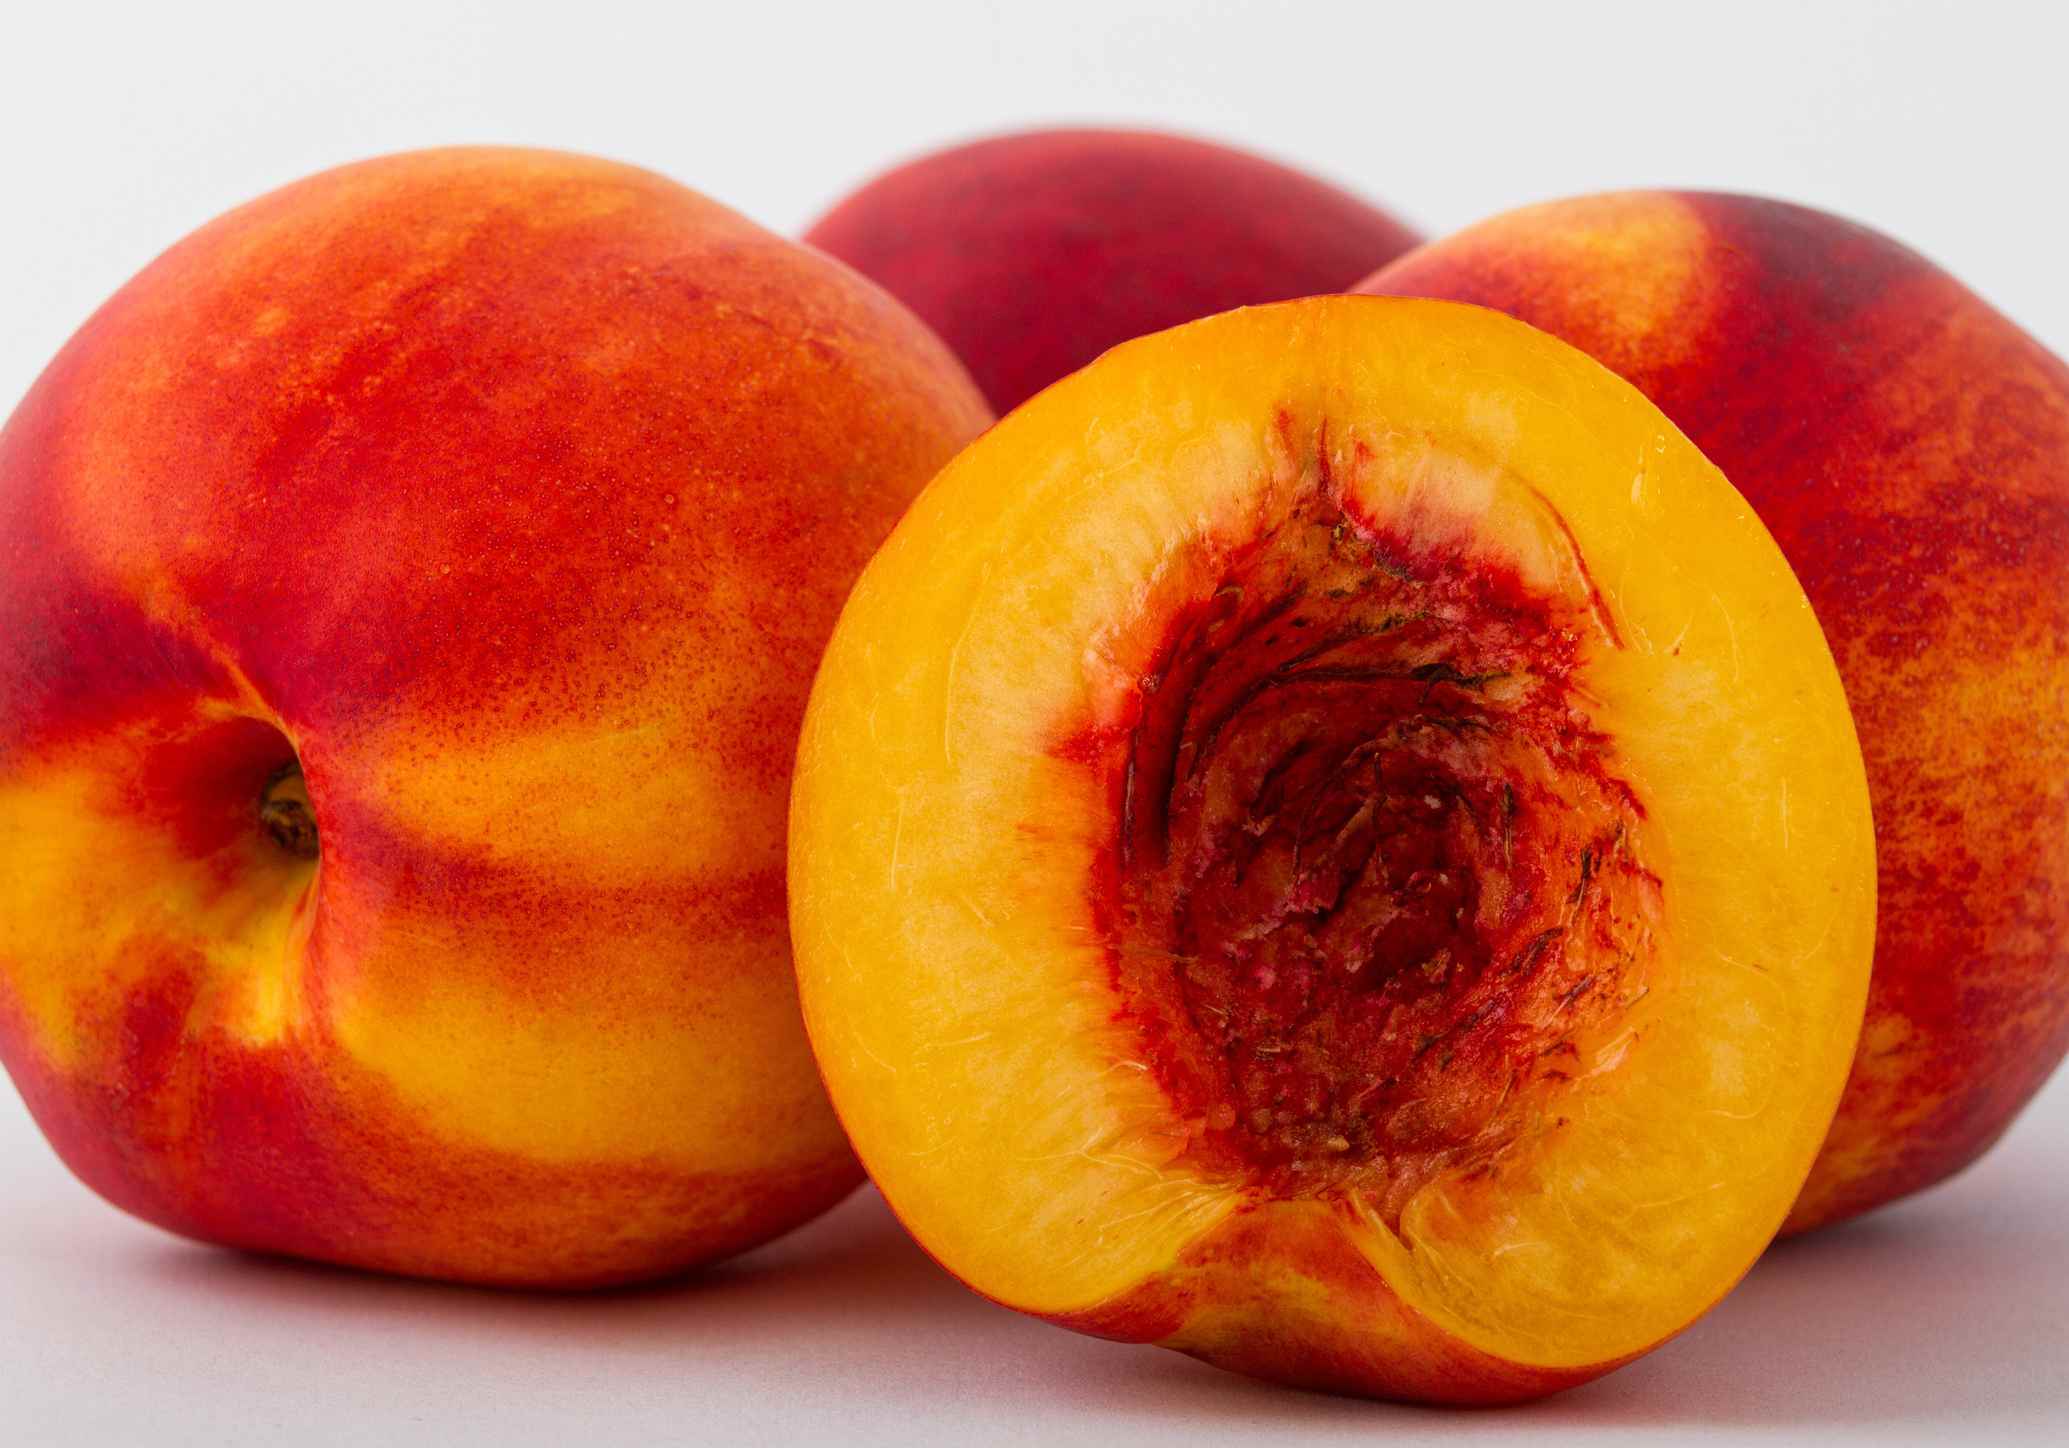 Peaches with one cut open and the pit removed.